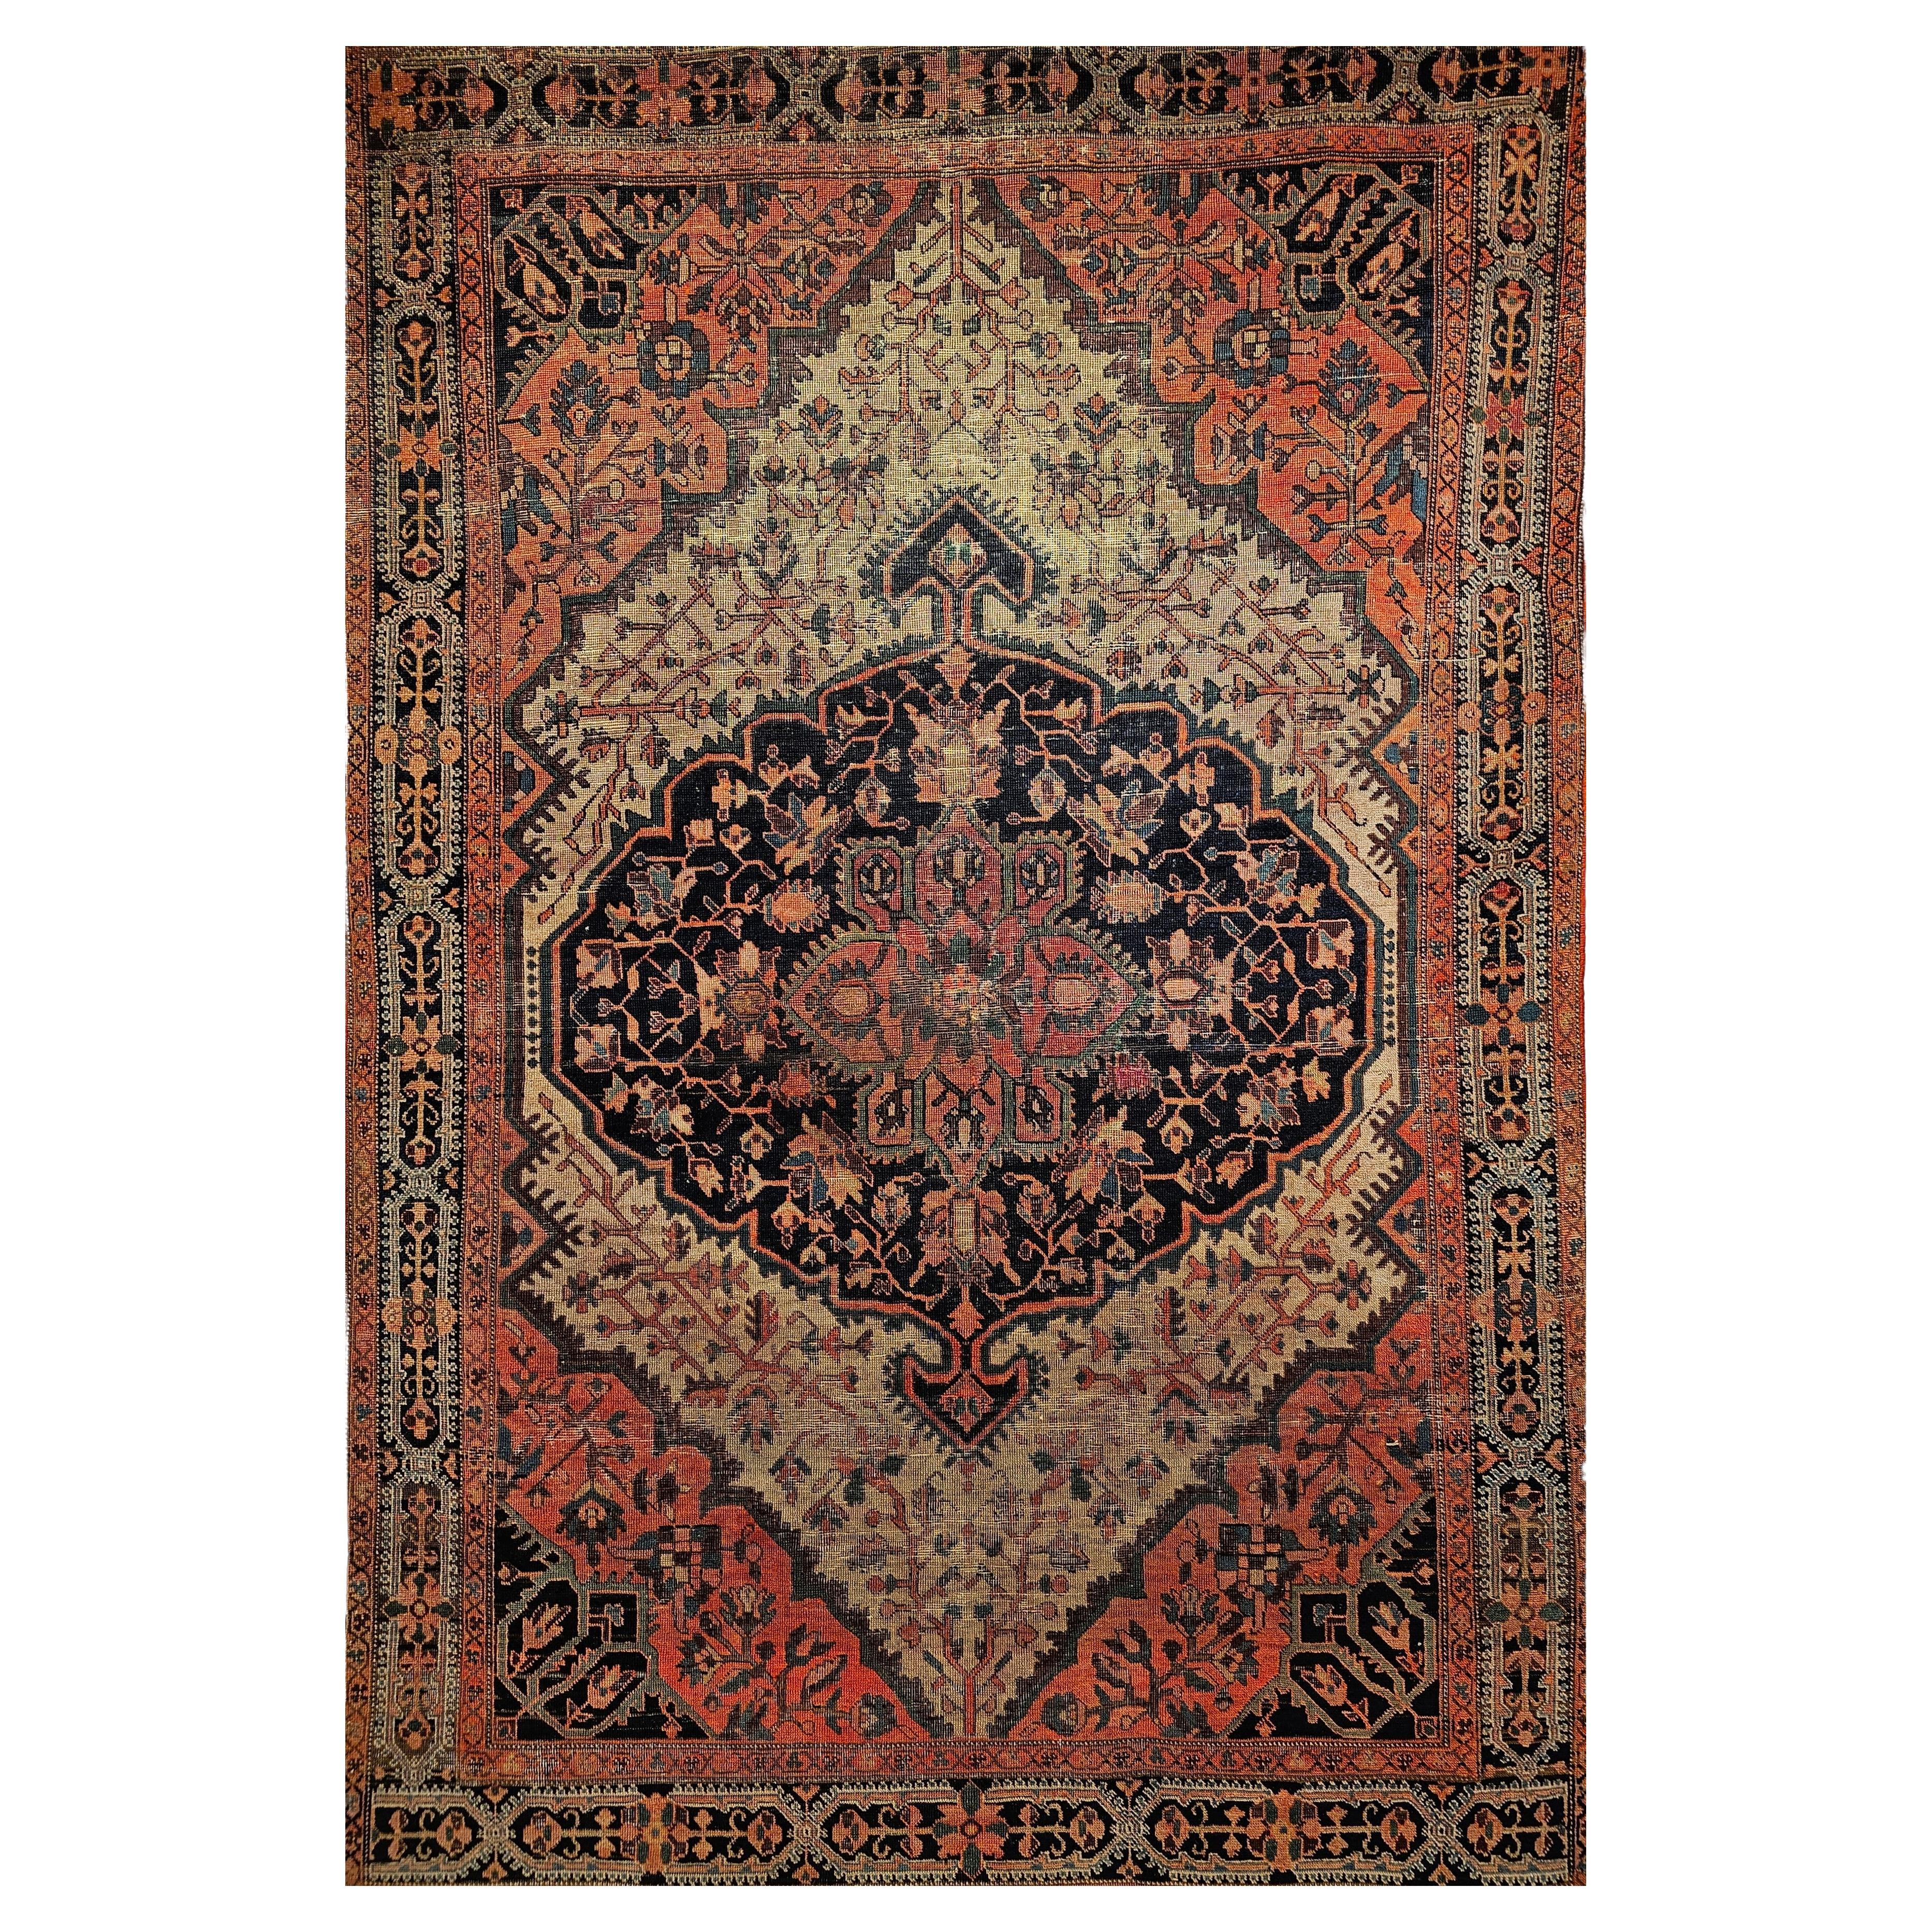 19th Century Persian Farahan Sarouk in Floral Pattern in Navy Blue, Terracotta